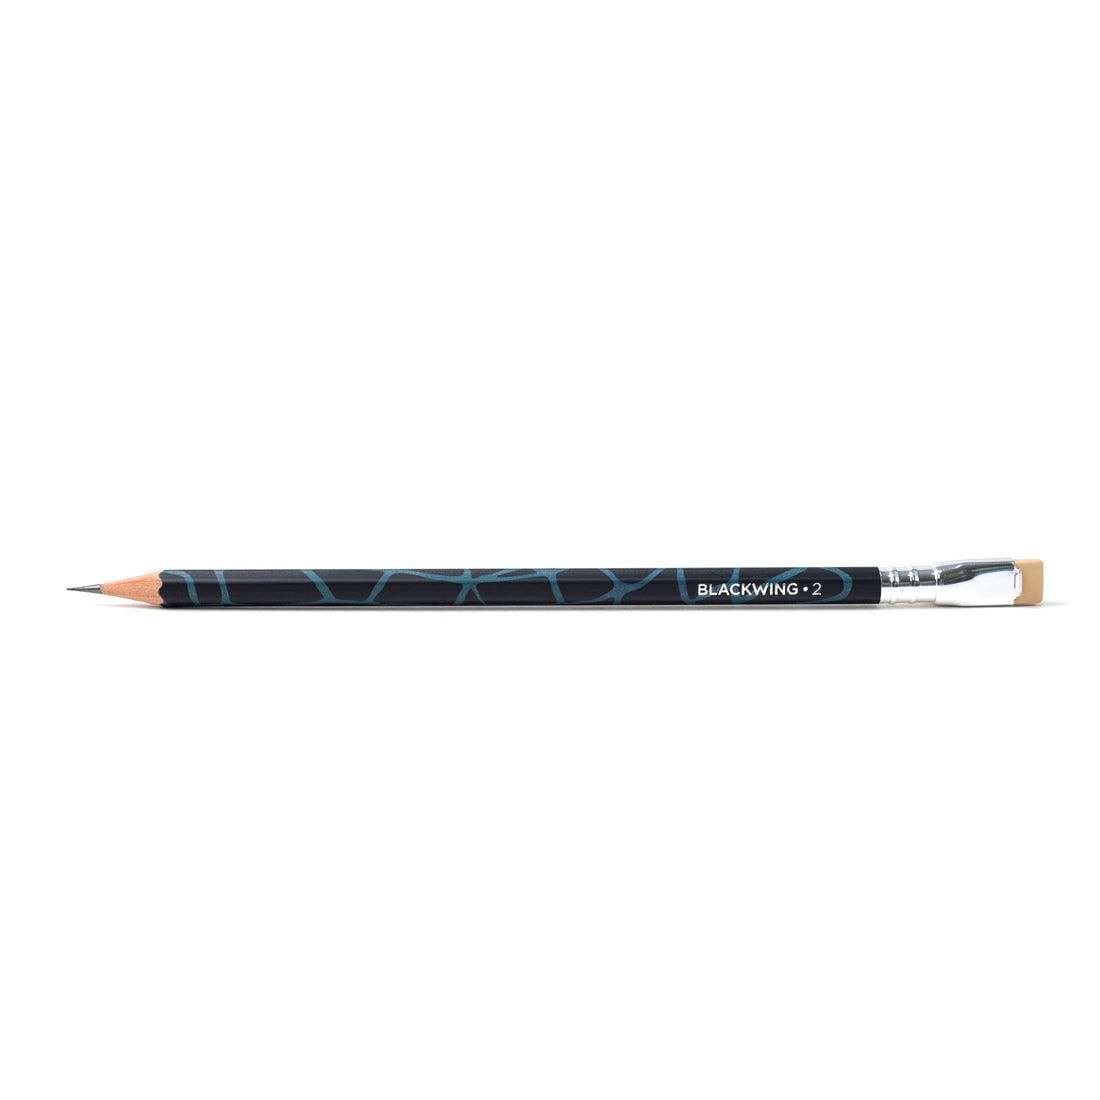 A set of Blackwing Volume 2 - The Light &amp; Dark Pencils on a black surface, reflecting the cultural shift of 1973.